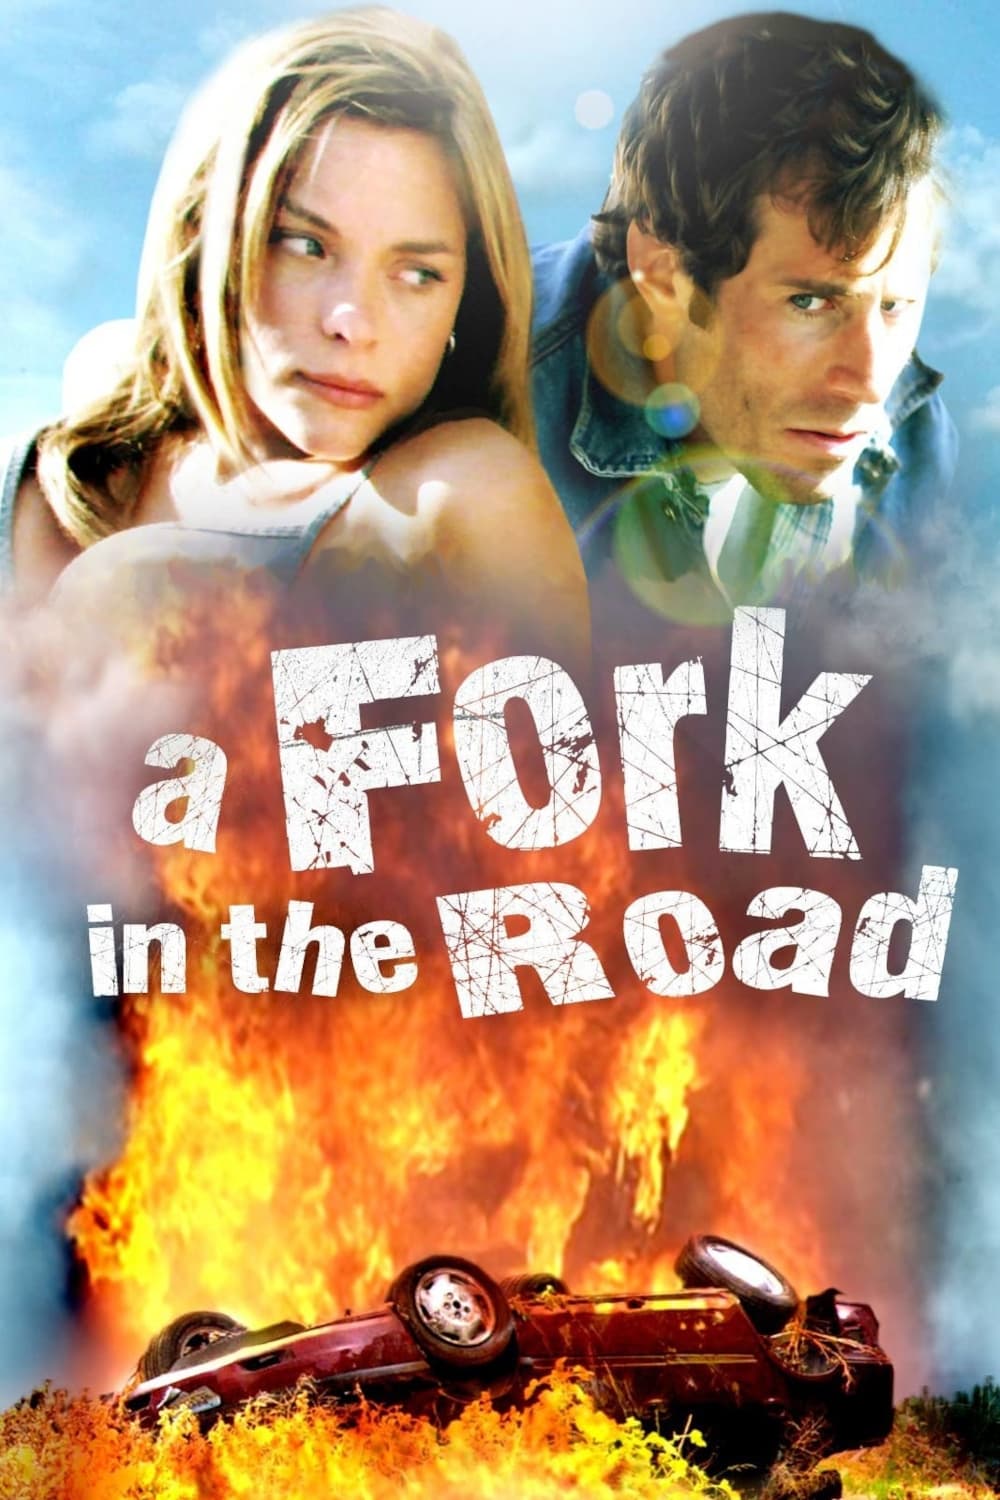 A Fork in the Road (2010)